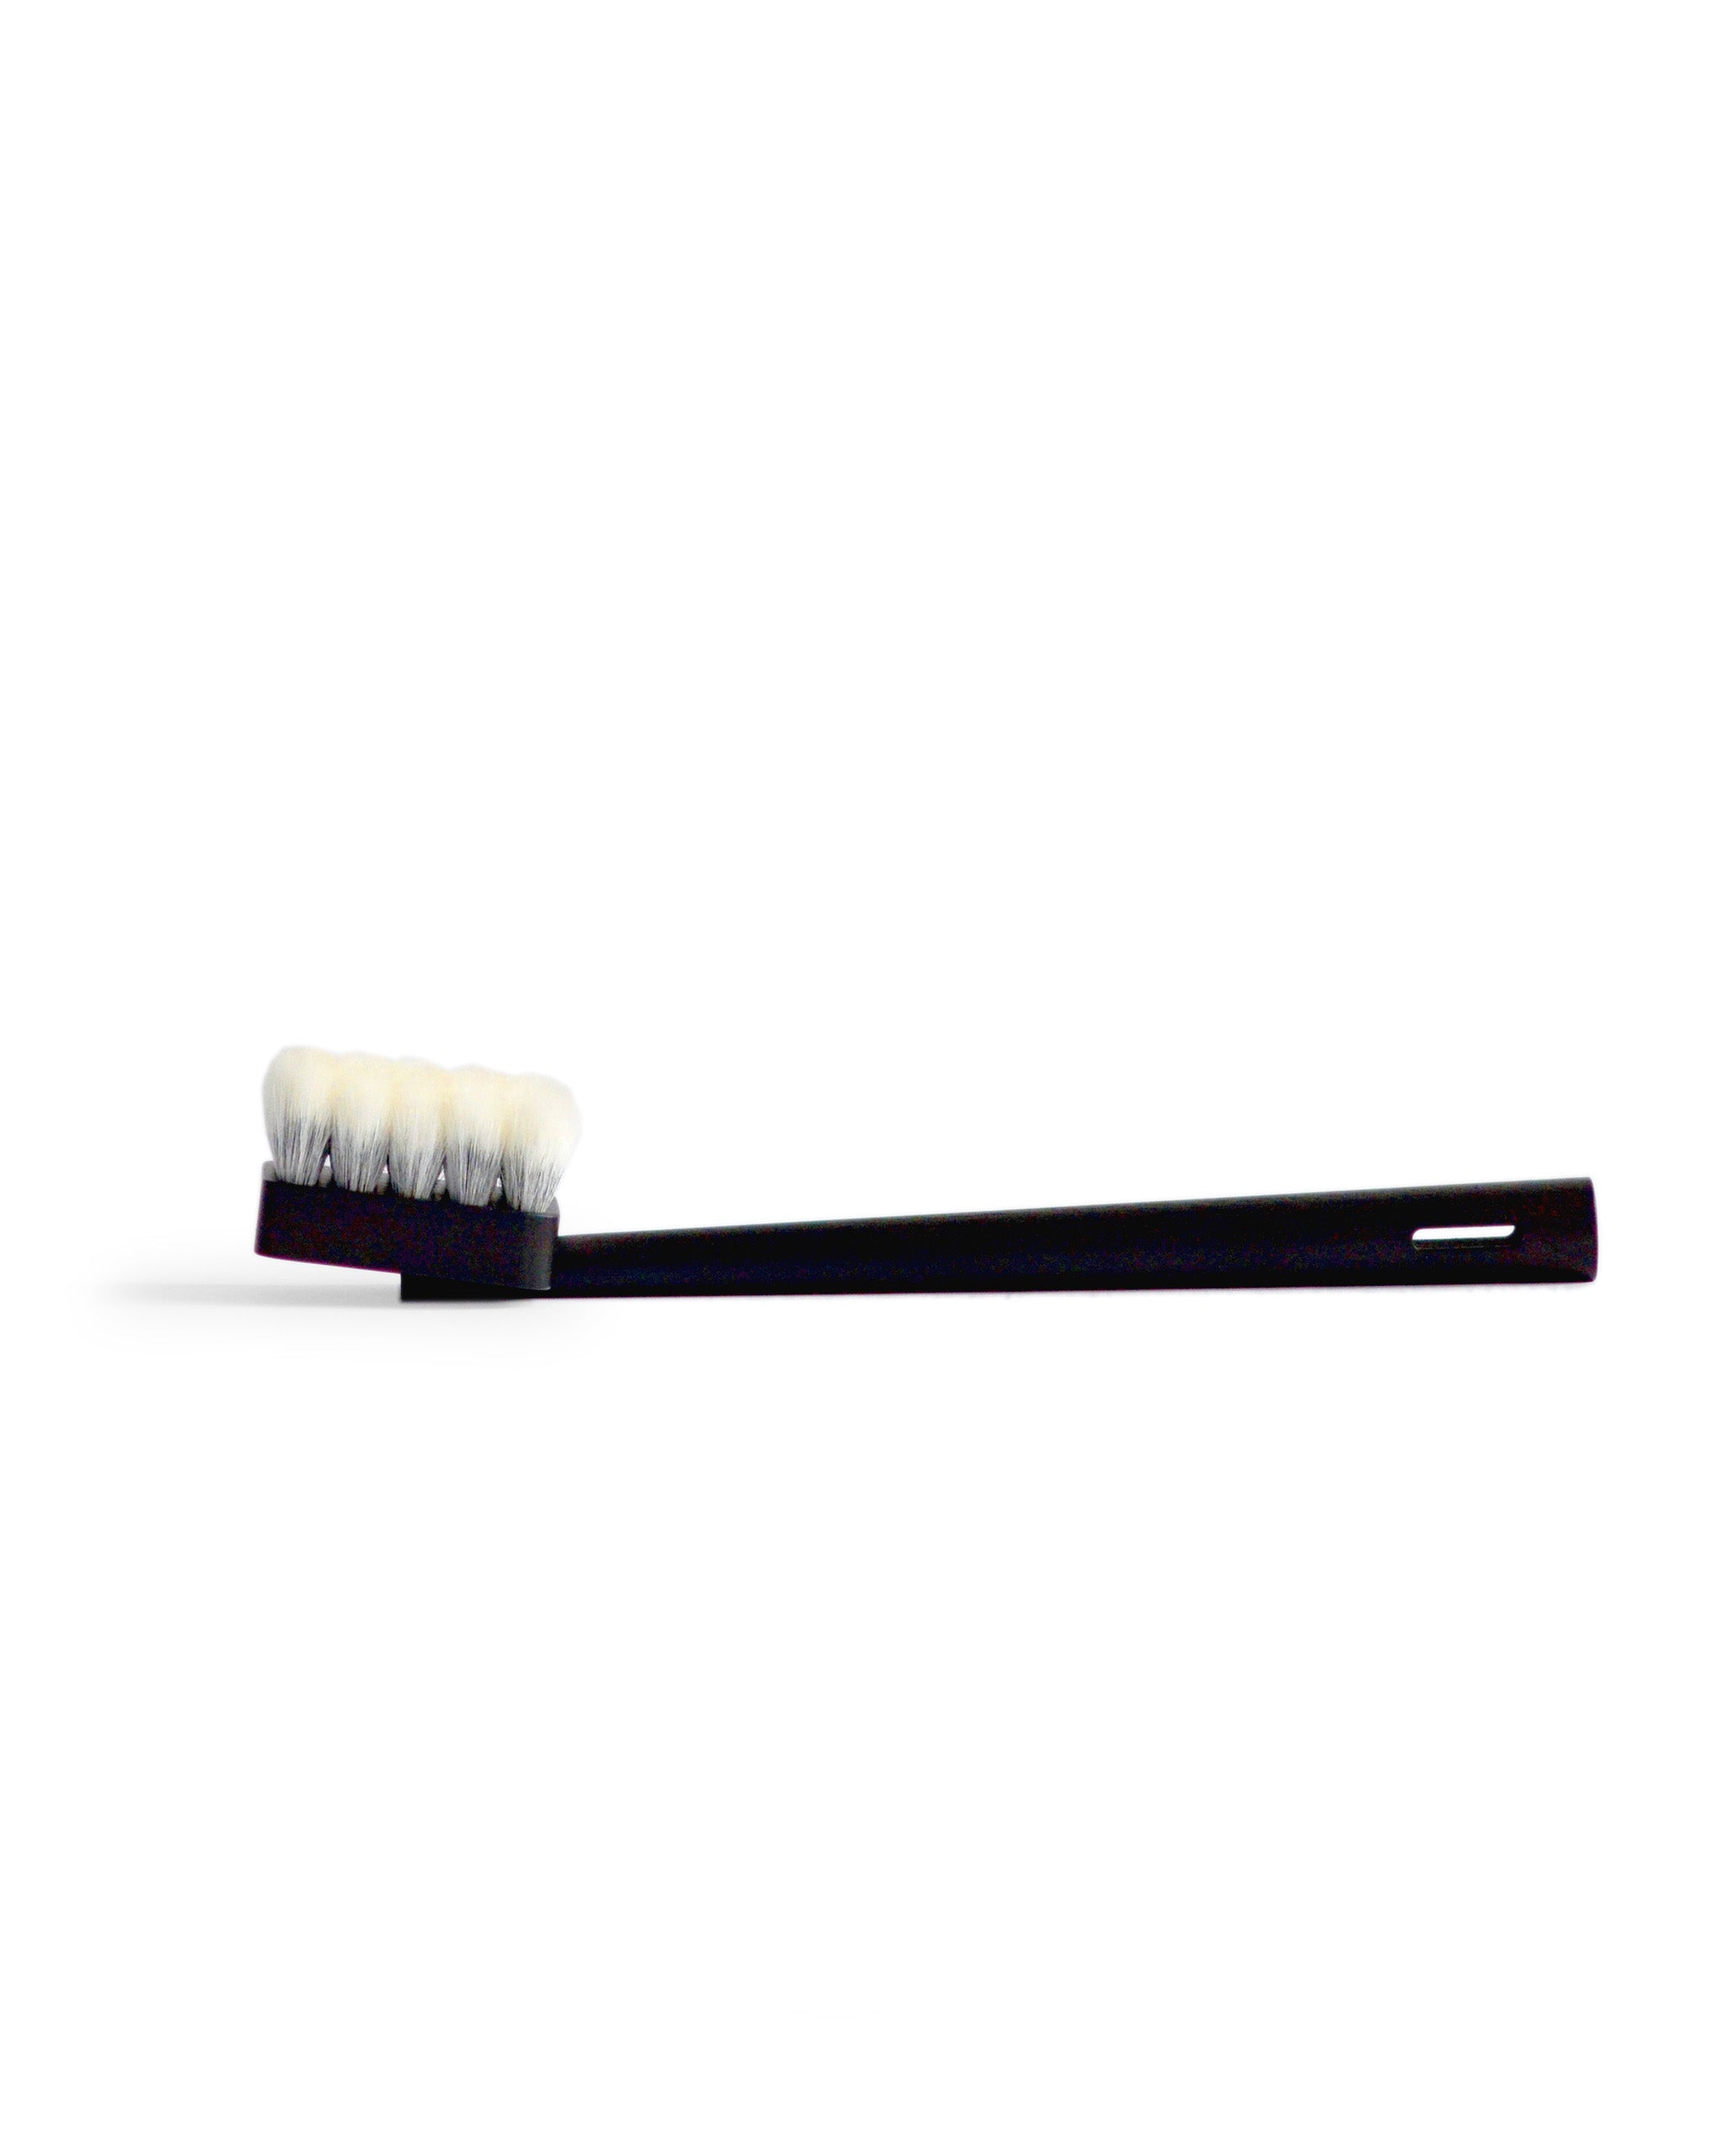 Side view of long jiva body brush with dark wood handle and light bristles by Shaquda laying against white background.